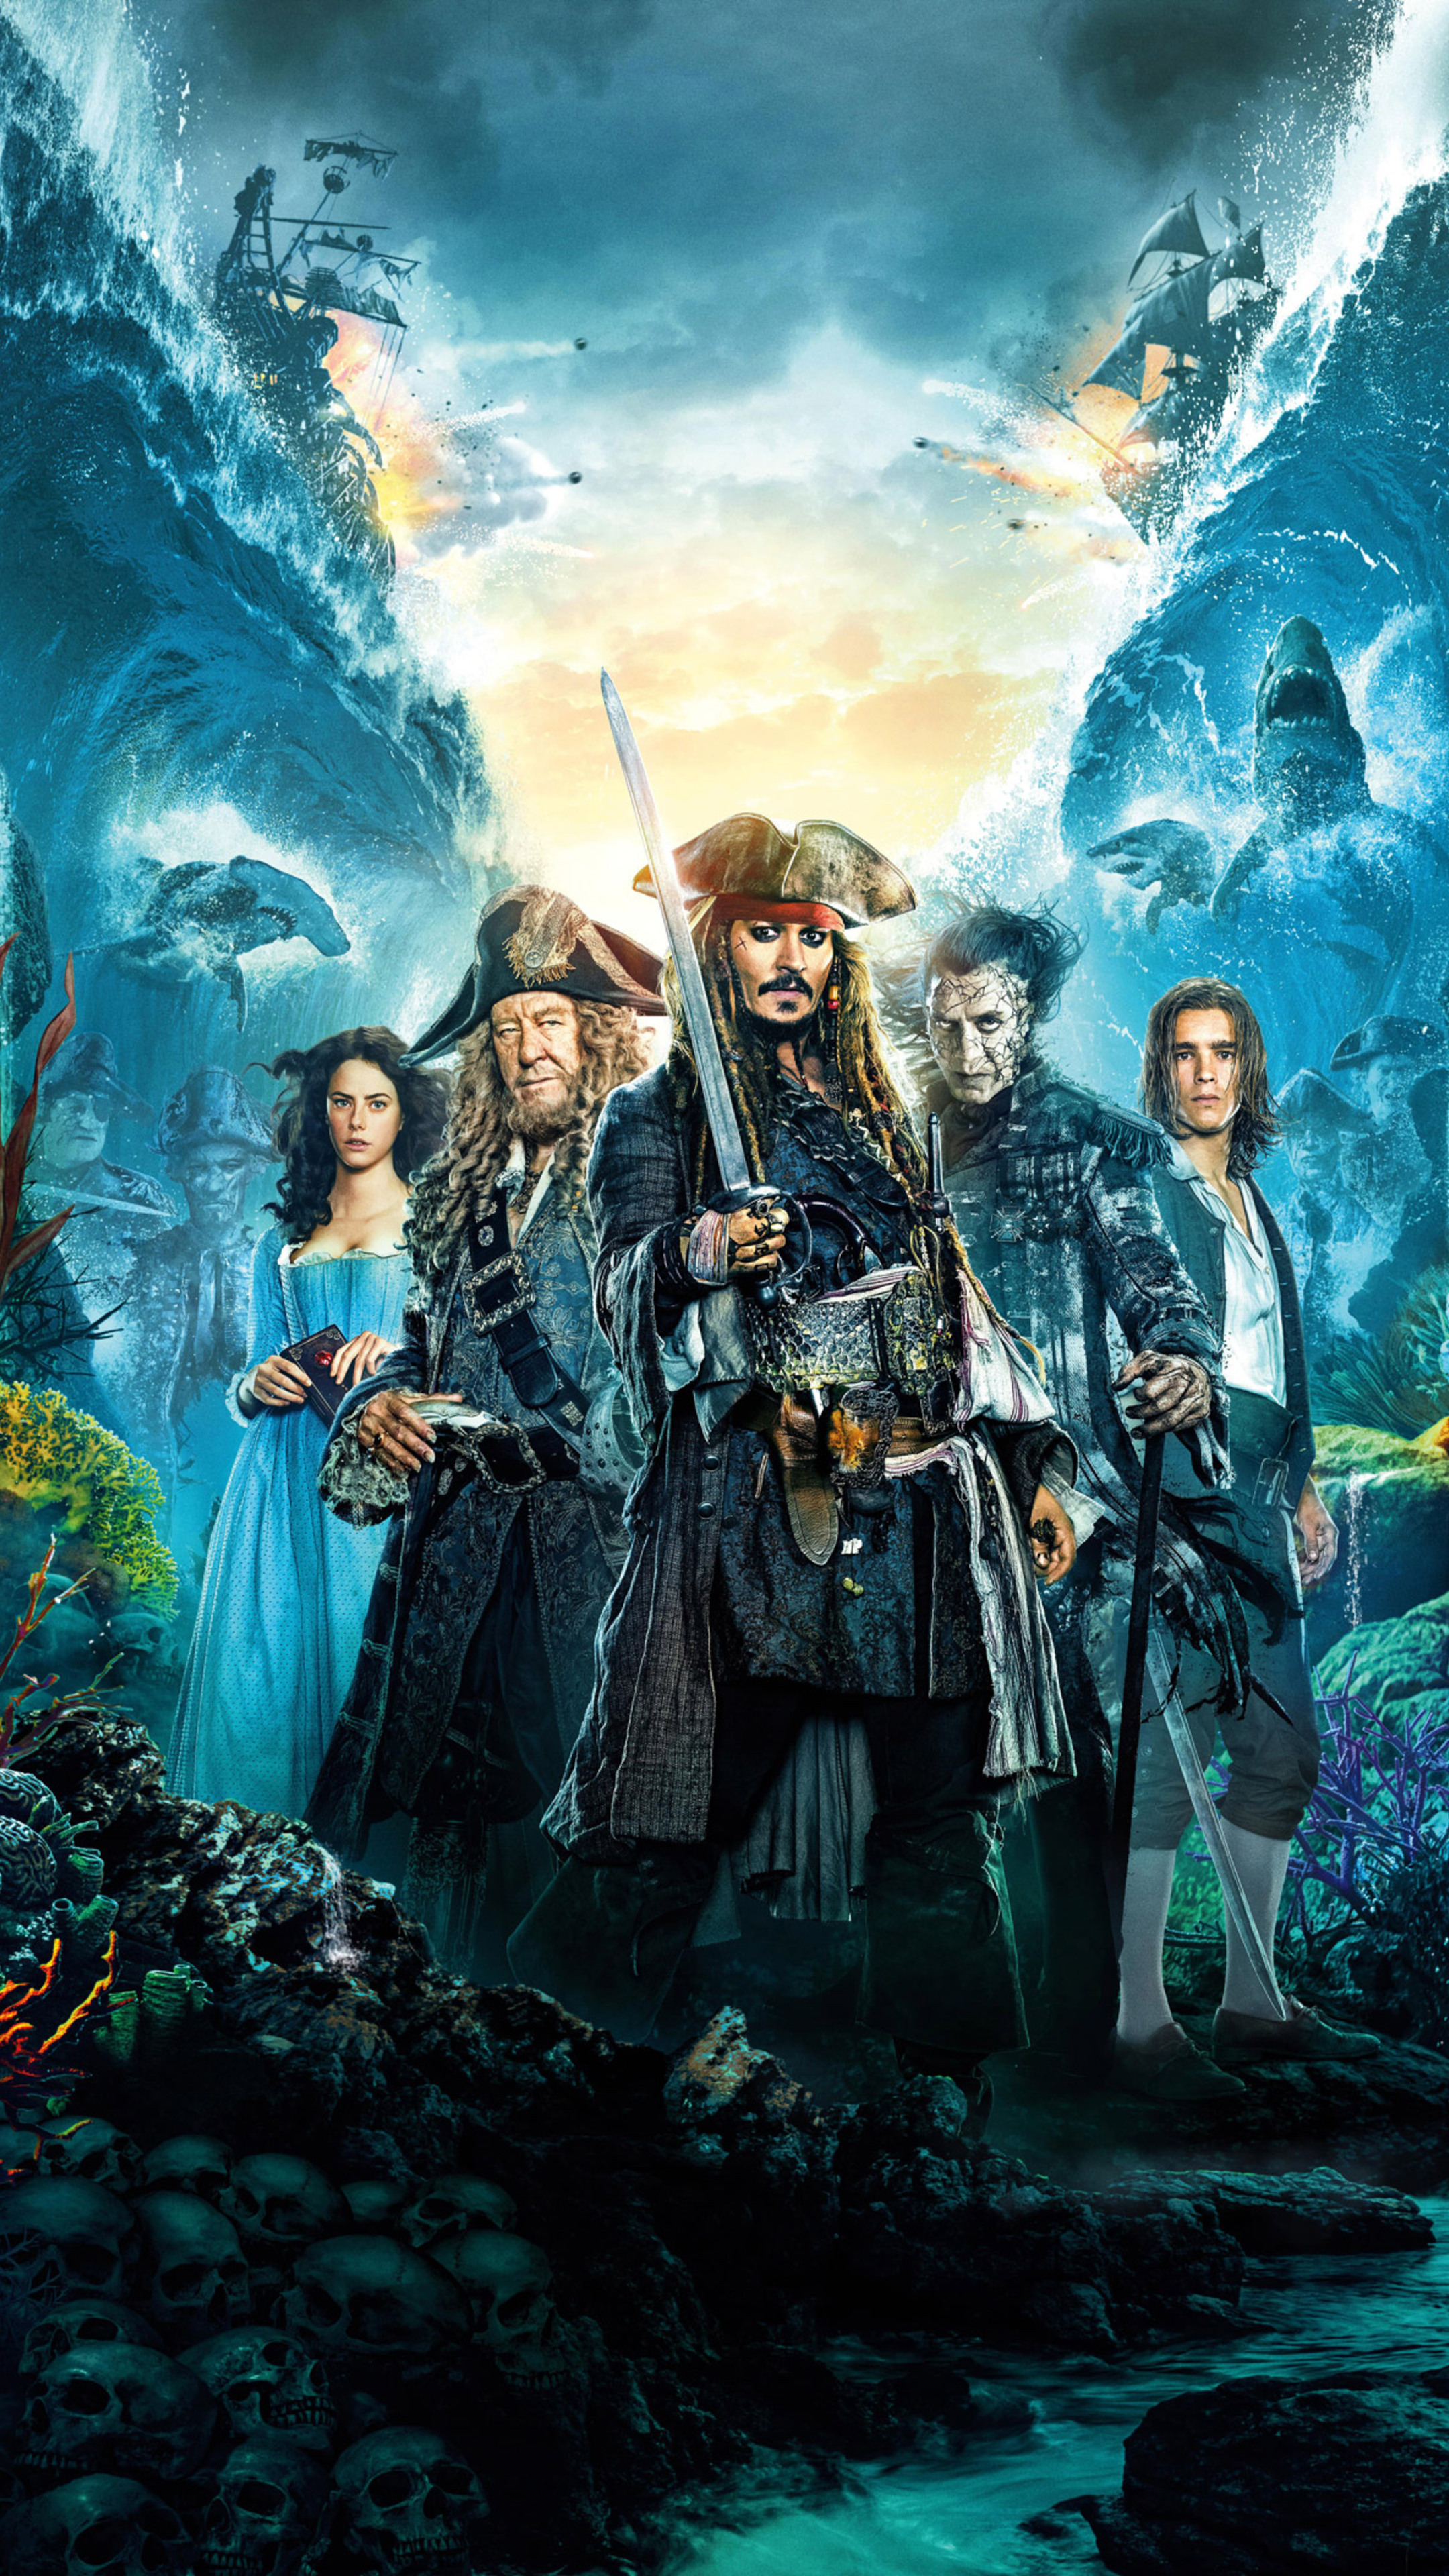 Pirates of the Caribbean: Jack Sparrow's adventures, Action movie. 2160x3840 4K Wallpaper.